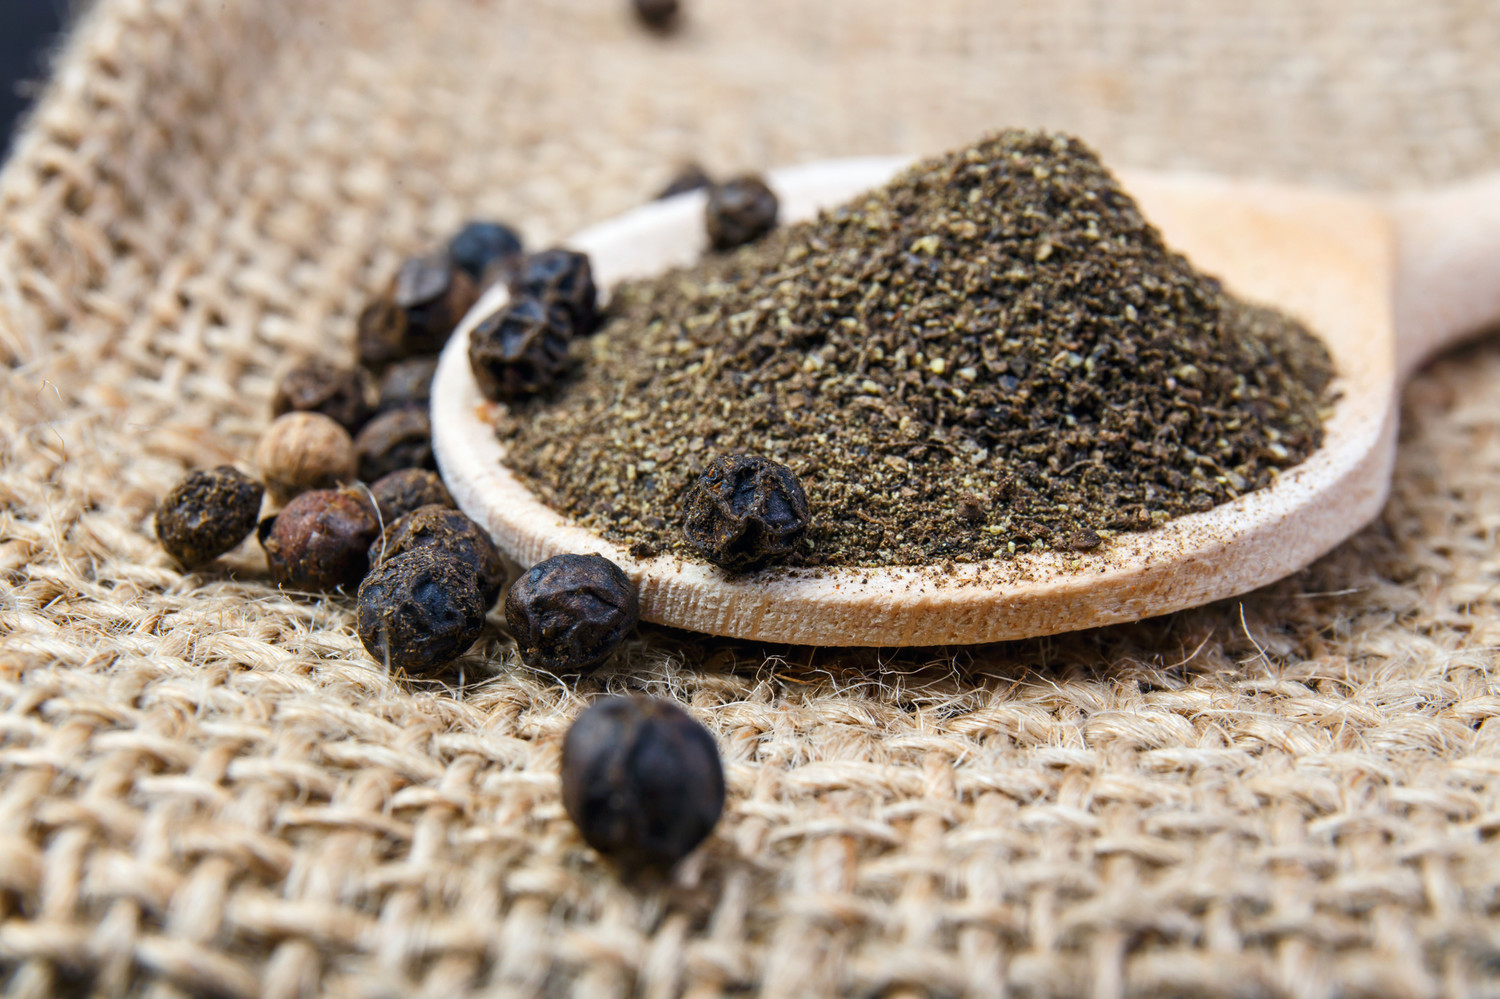 Where Does Black Pepper Come From?